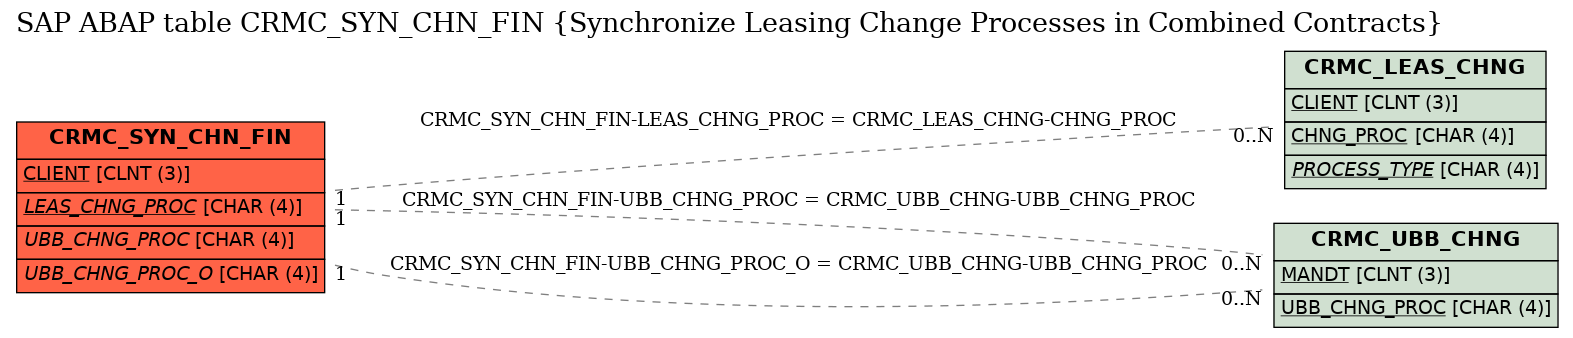 E-R Diagram for table CRMC_SYN_CHN_FIN (Synchronize Leasing Change Processes in Combined Contracts)